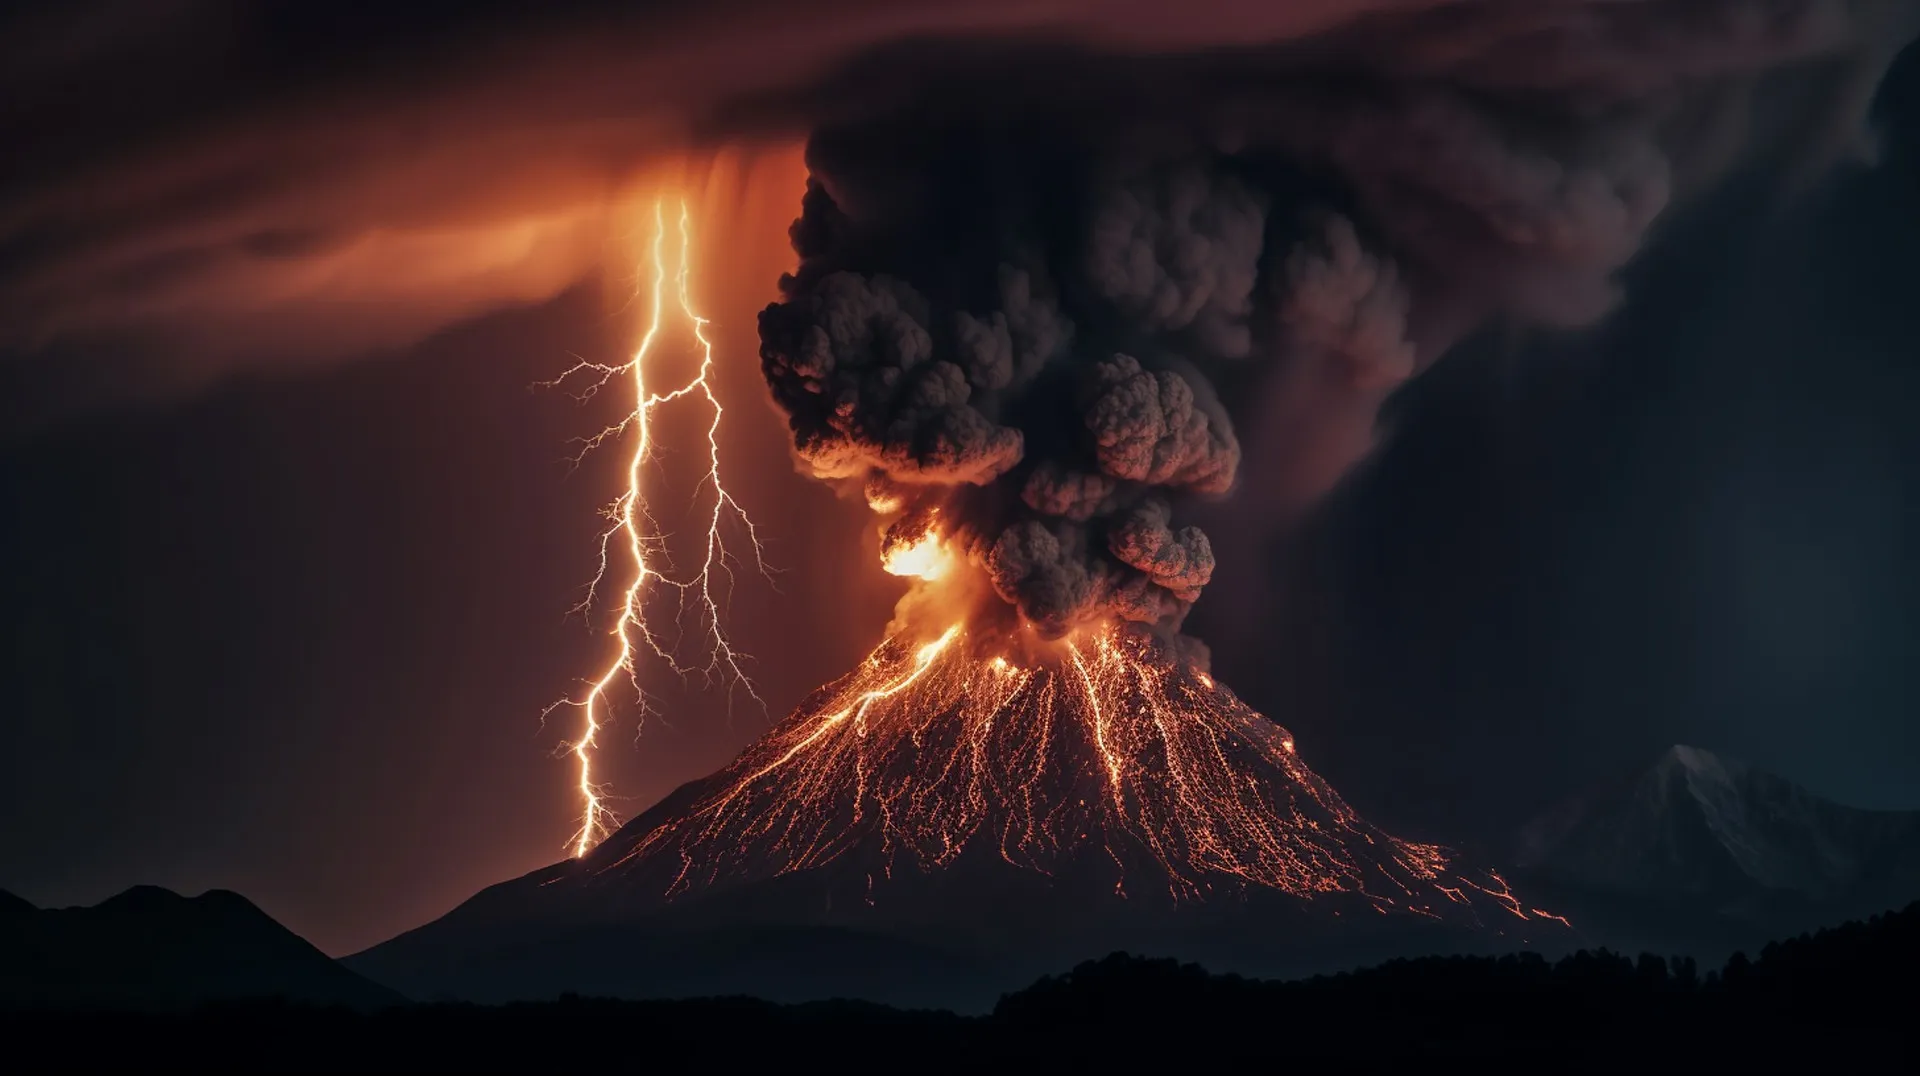 A dramatic volcanic eruption spewing smoke and lightning, showcasing the raw power of nature's fury.